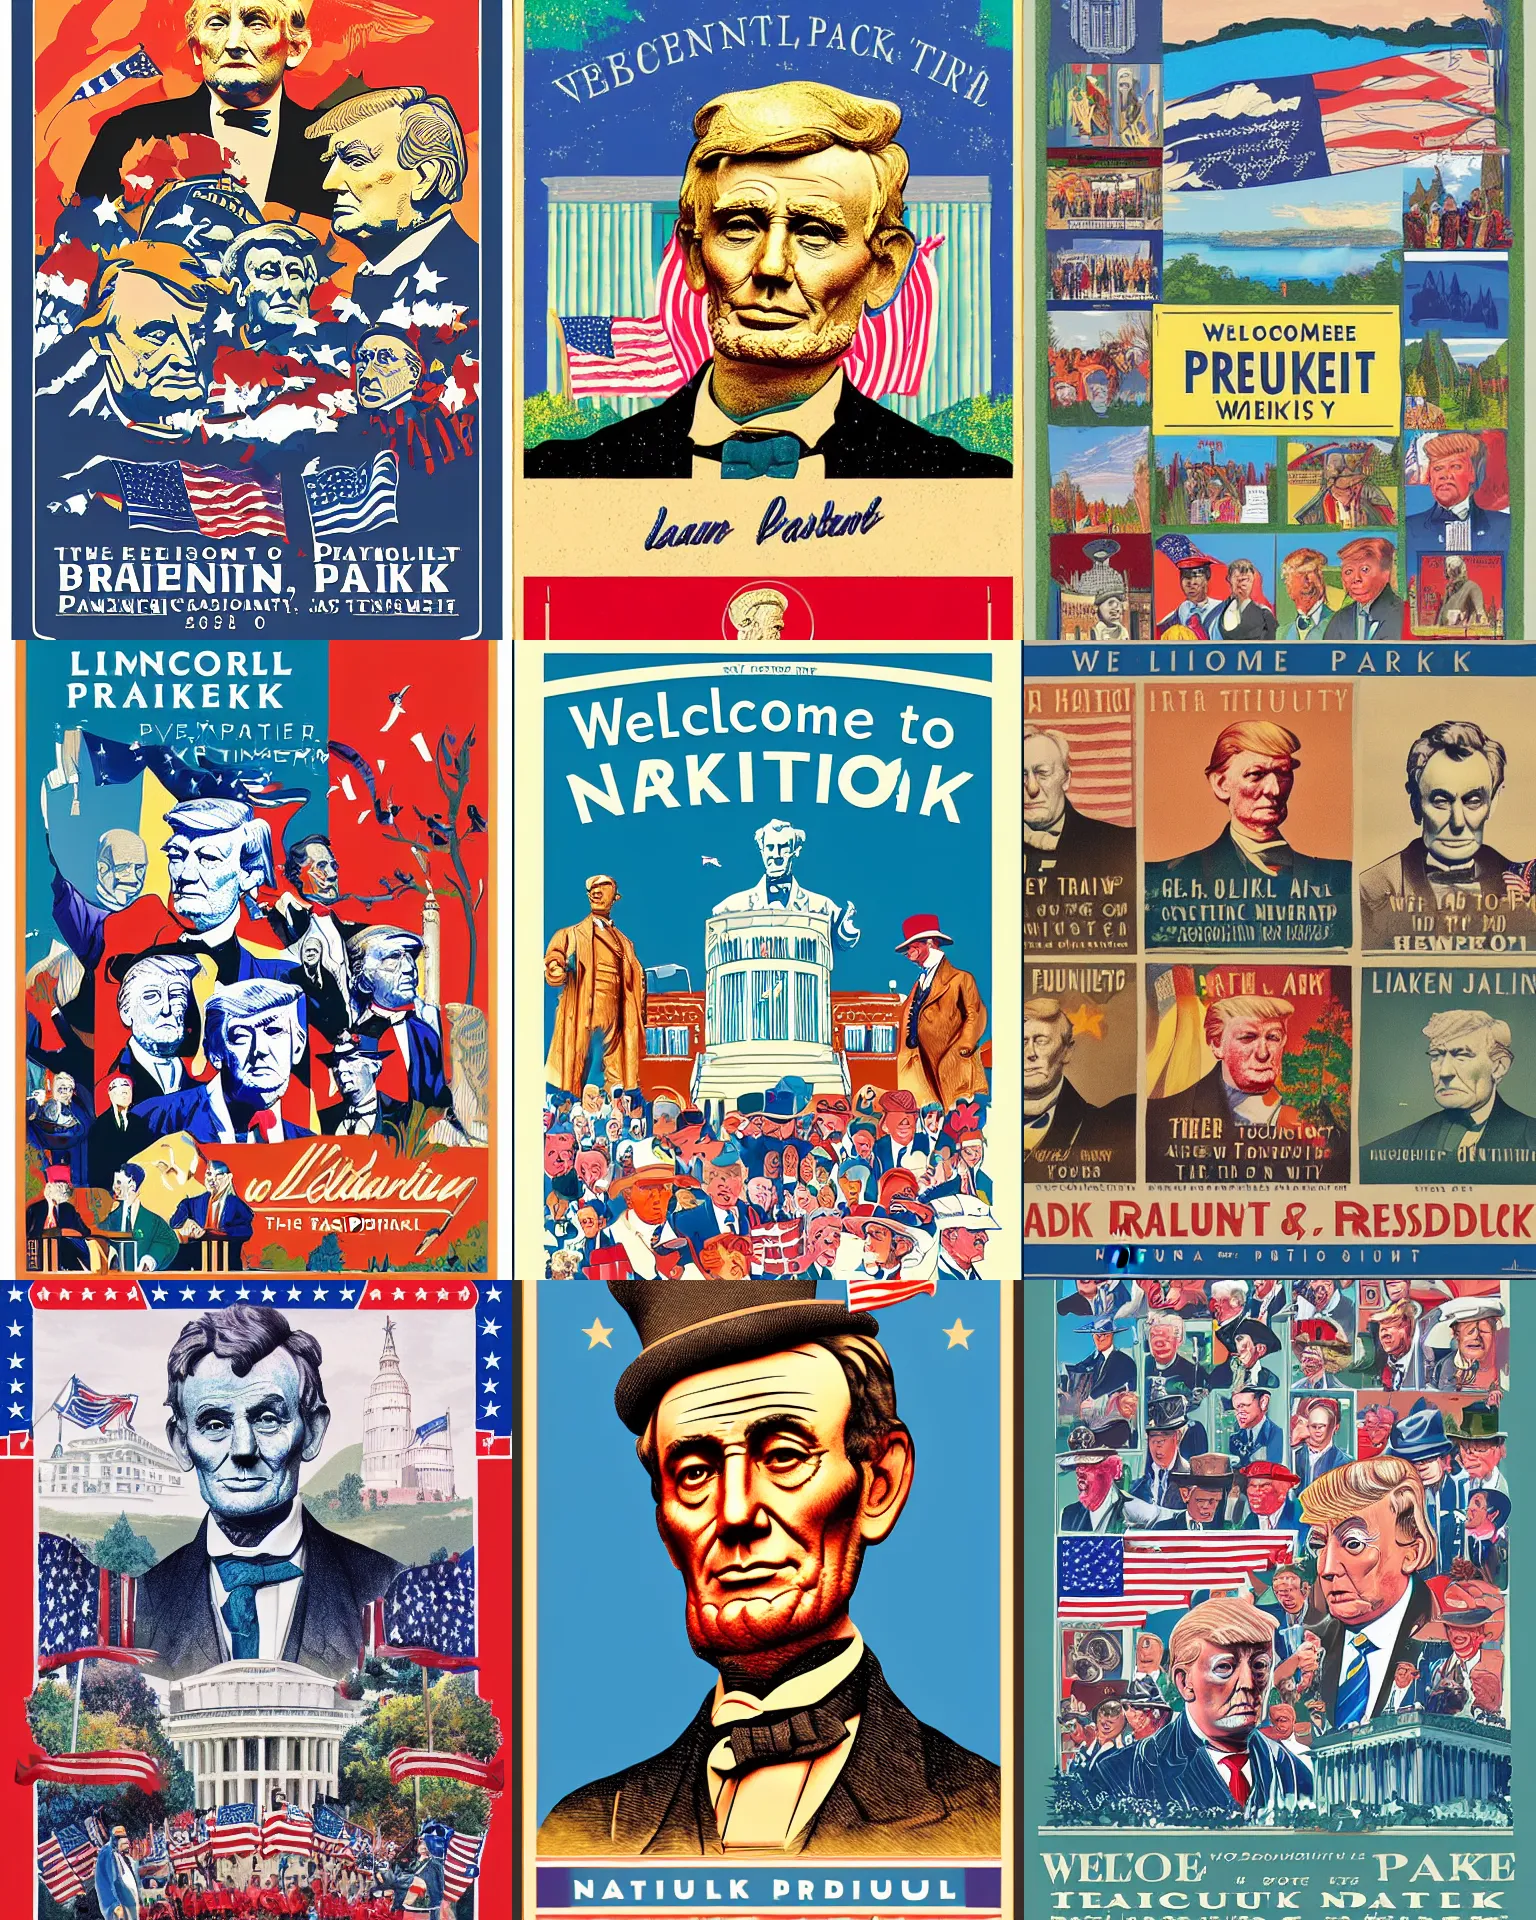 Prompt: welcome to beautiful president national park! lincoln, fdr, teddy, ike, trump, patriotic, god bless america! vibrant tourism poster, colorful, cartoon